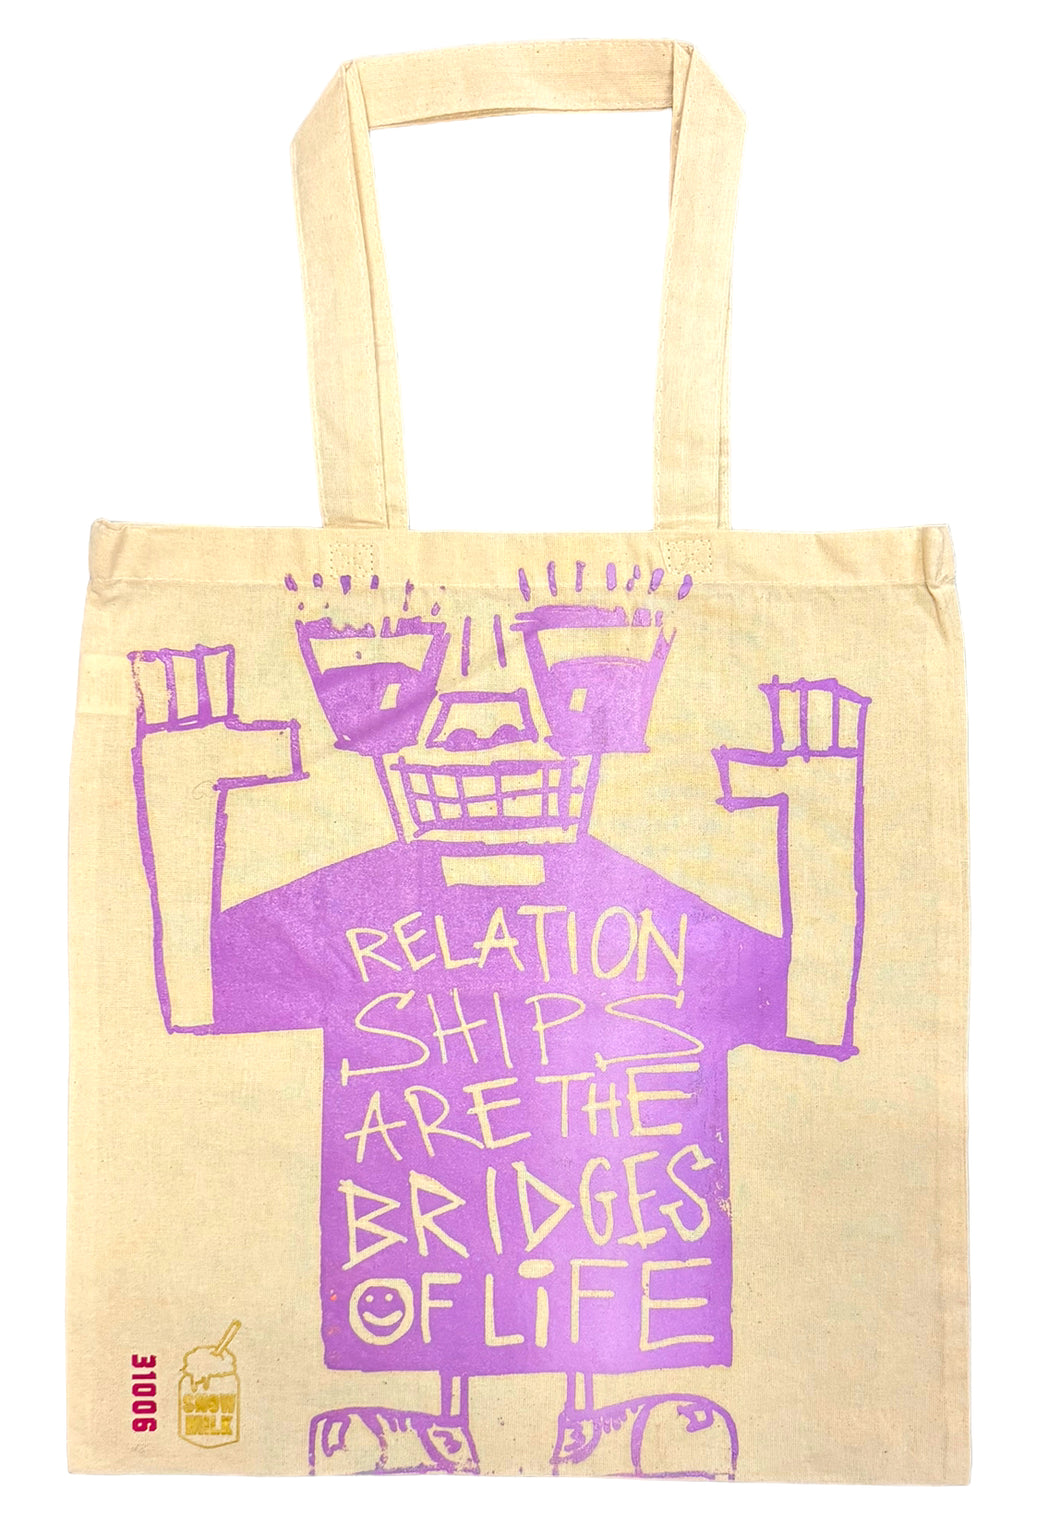 Relationships Are The Bridges Of Life Tote Bag (Size Large)